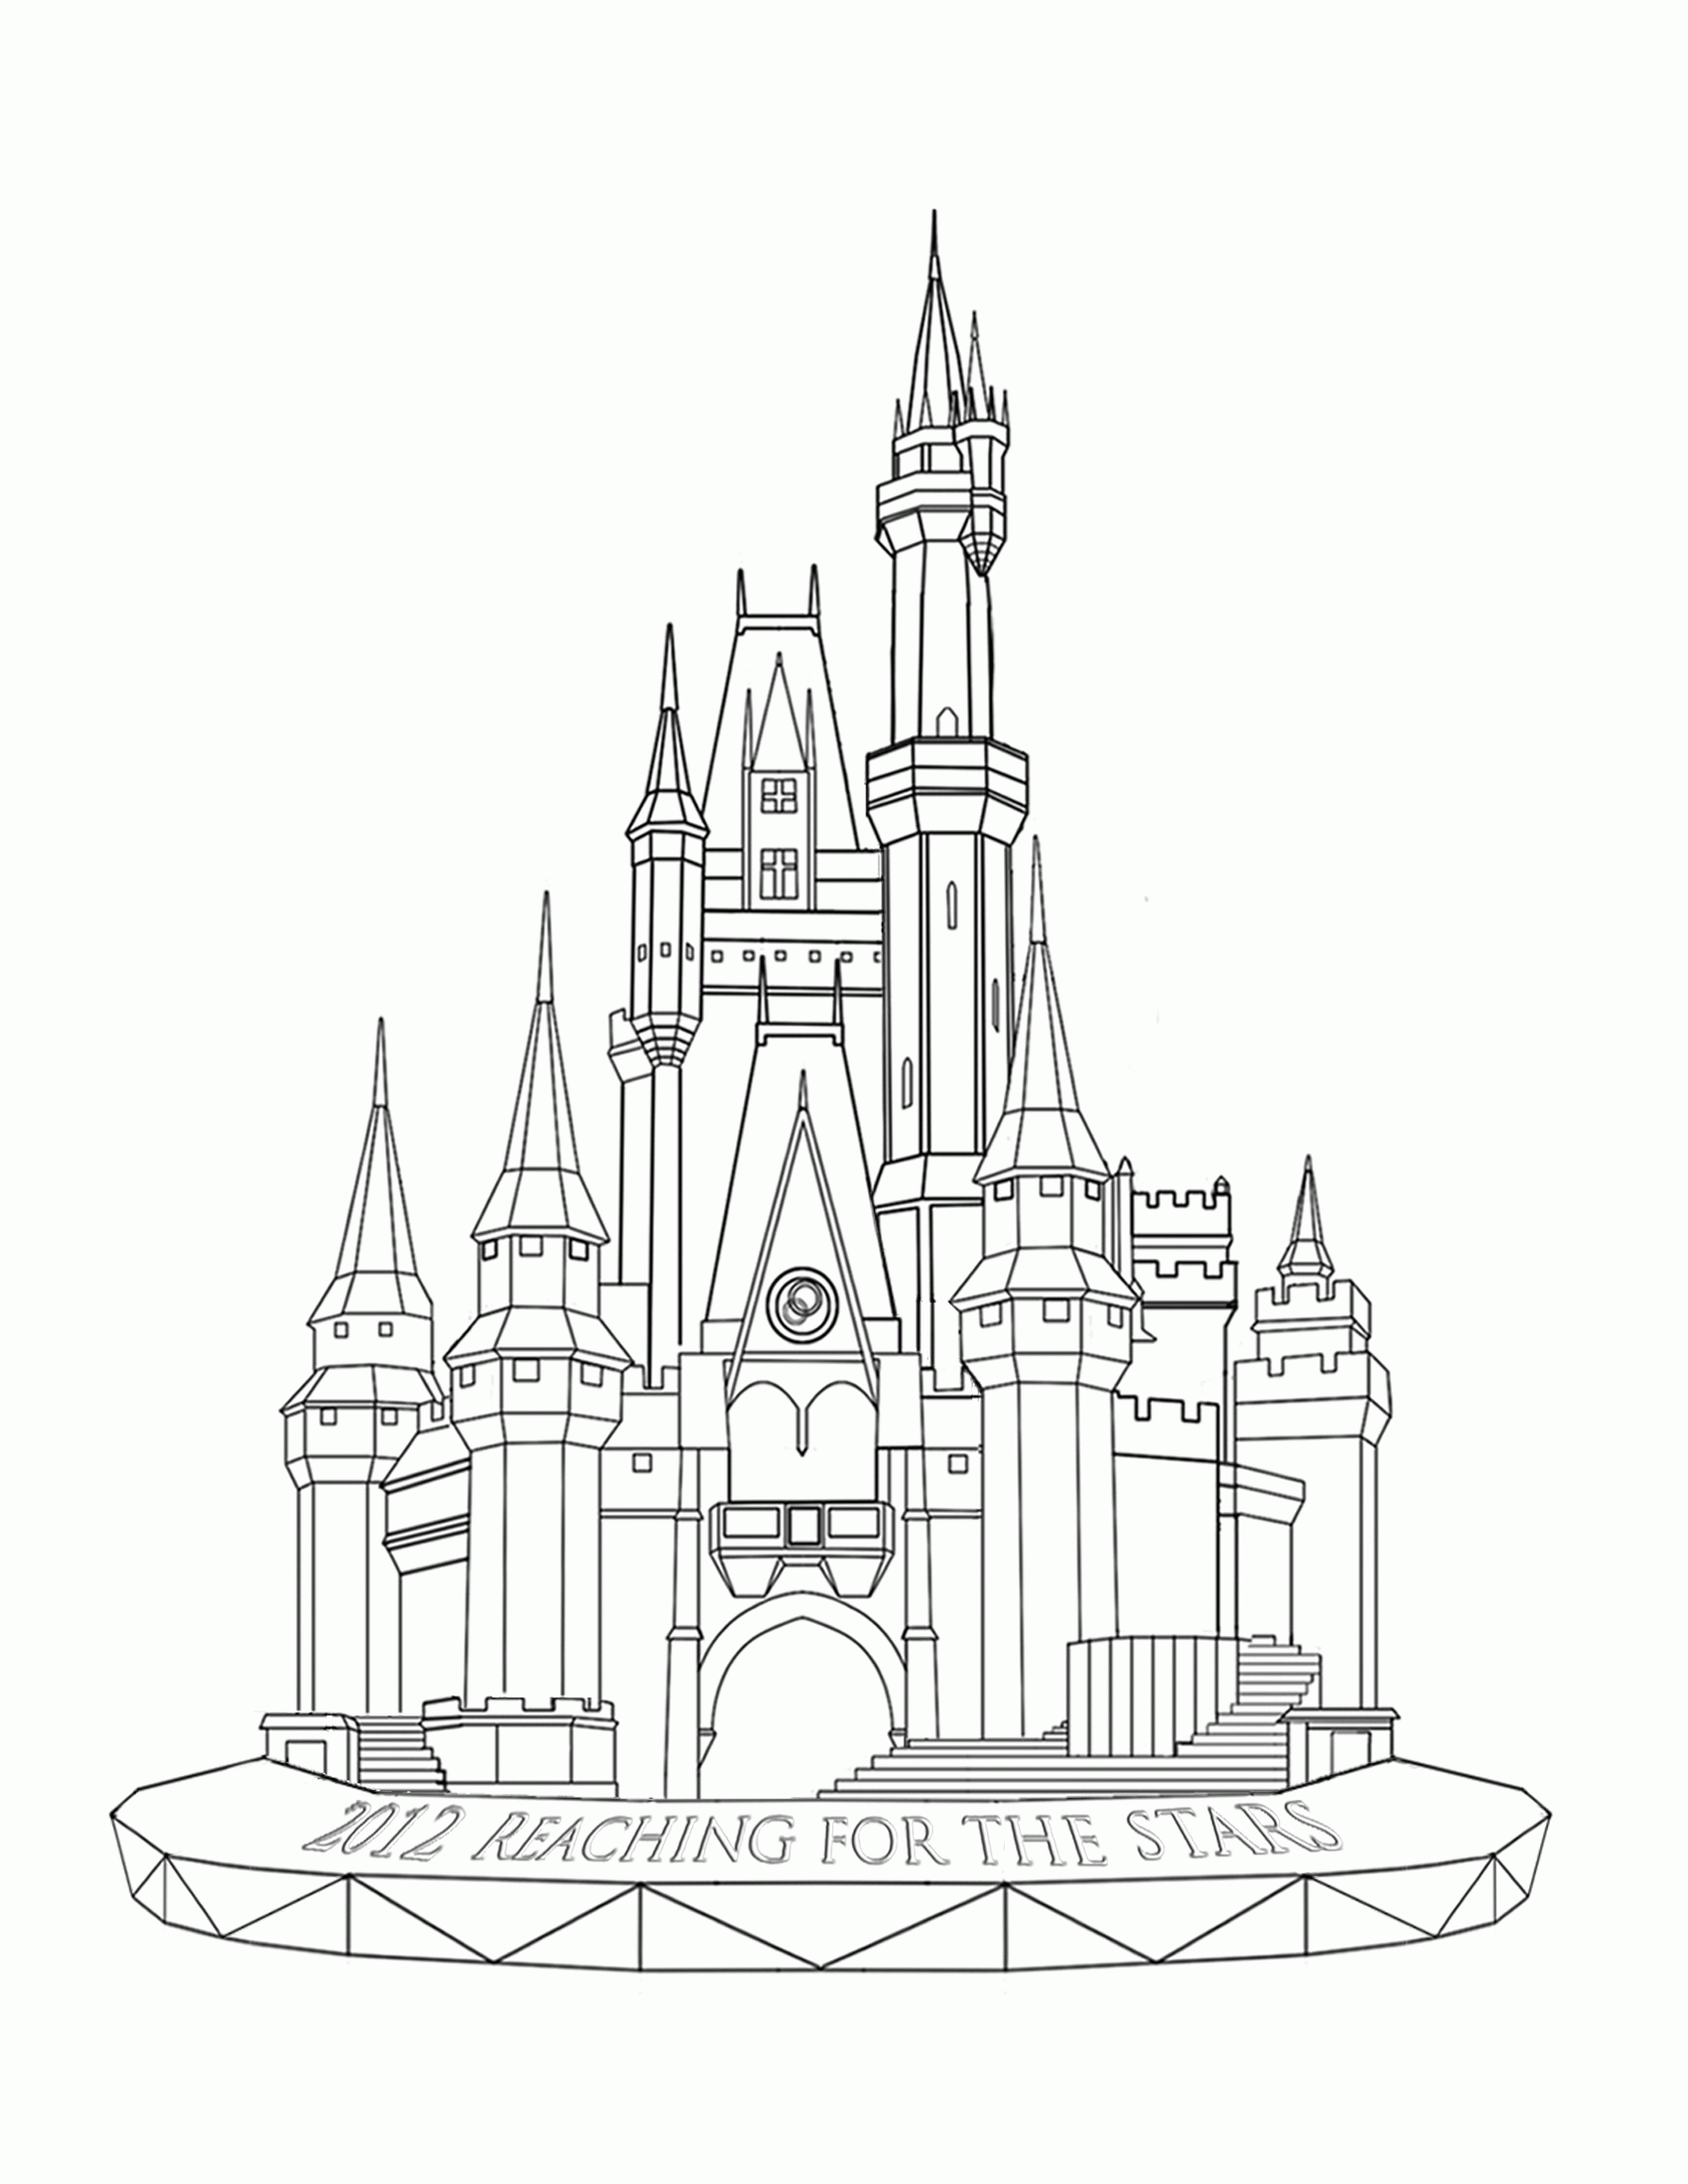 Handy Free Coloring Pages Of Disney Land Rides - Widetheme